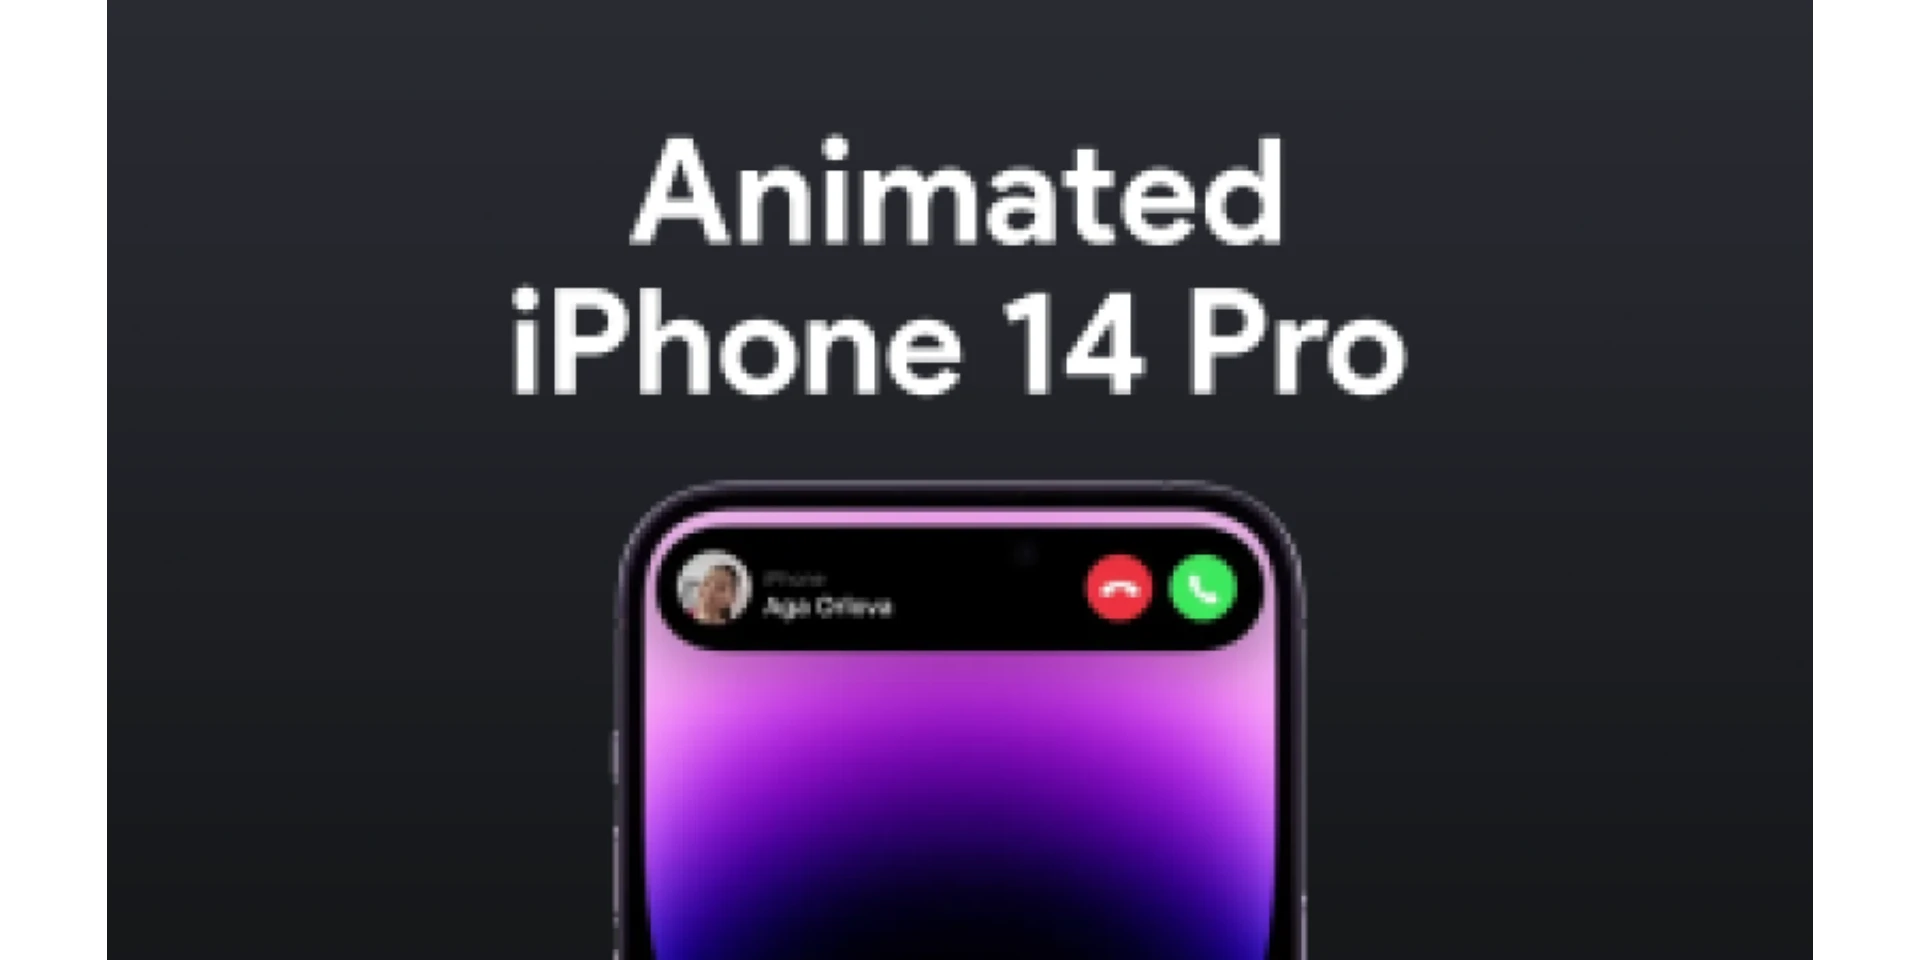 Animated iPhone 14 Pro for Figma and Adobe XD